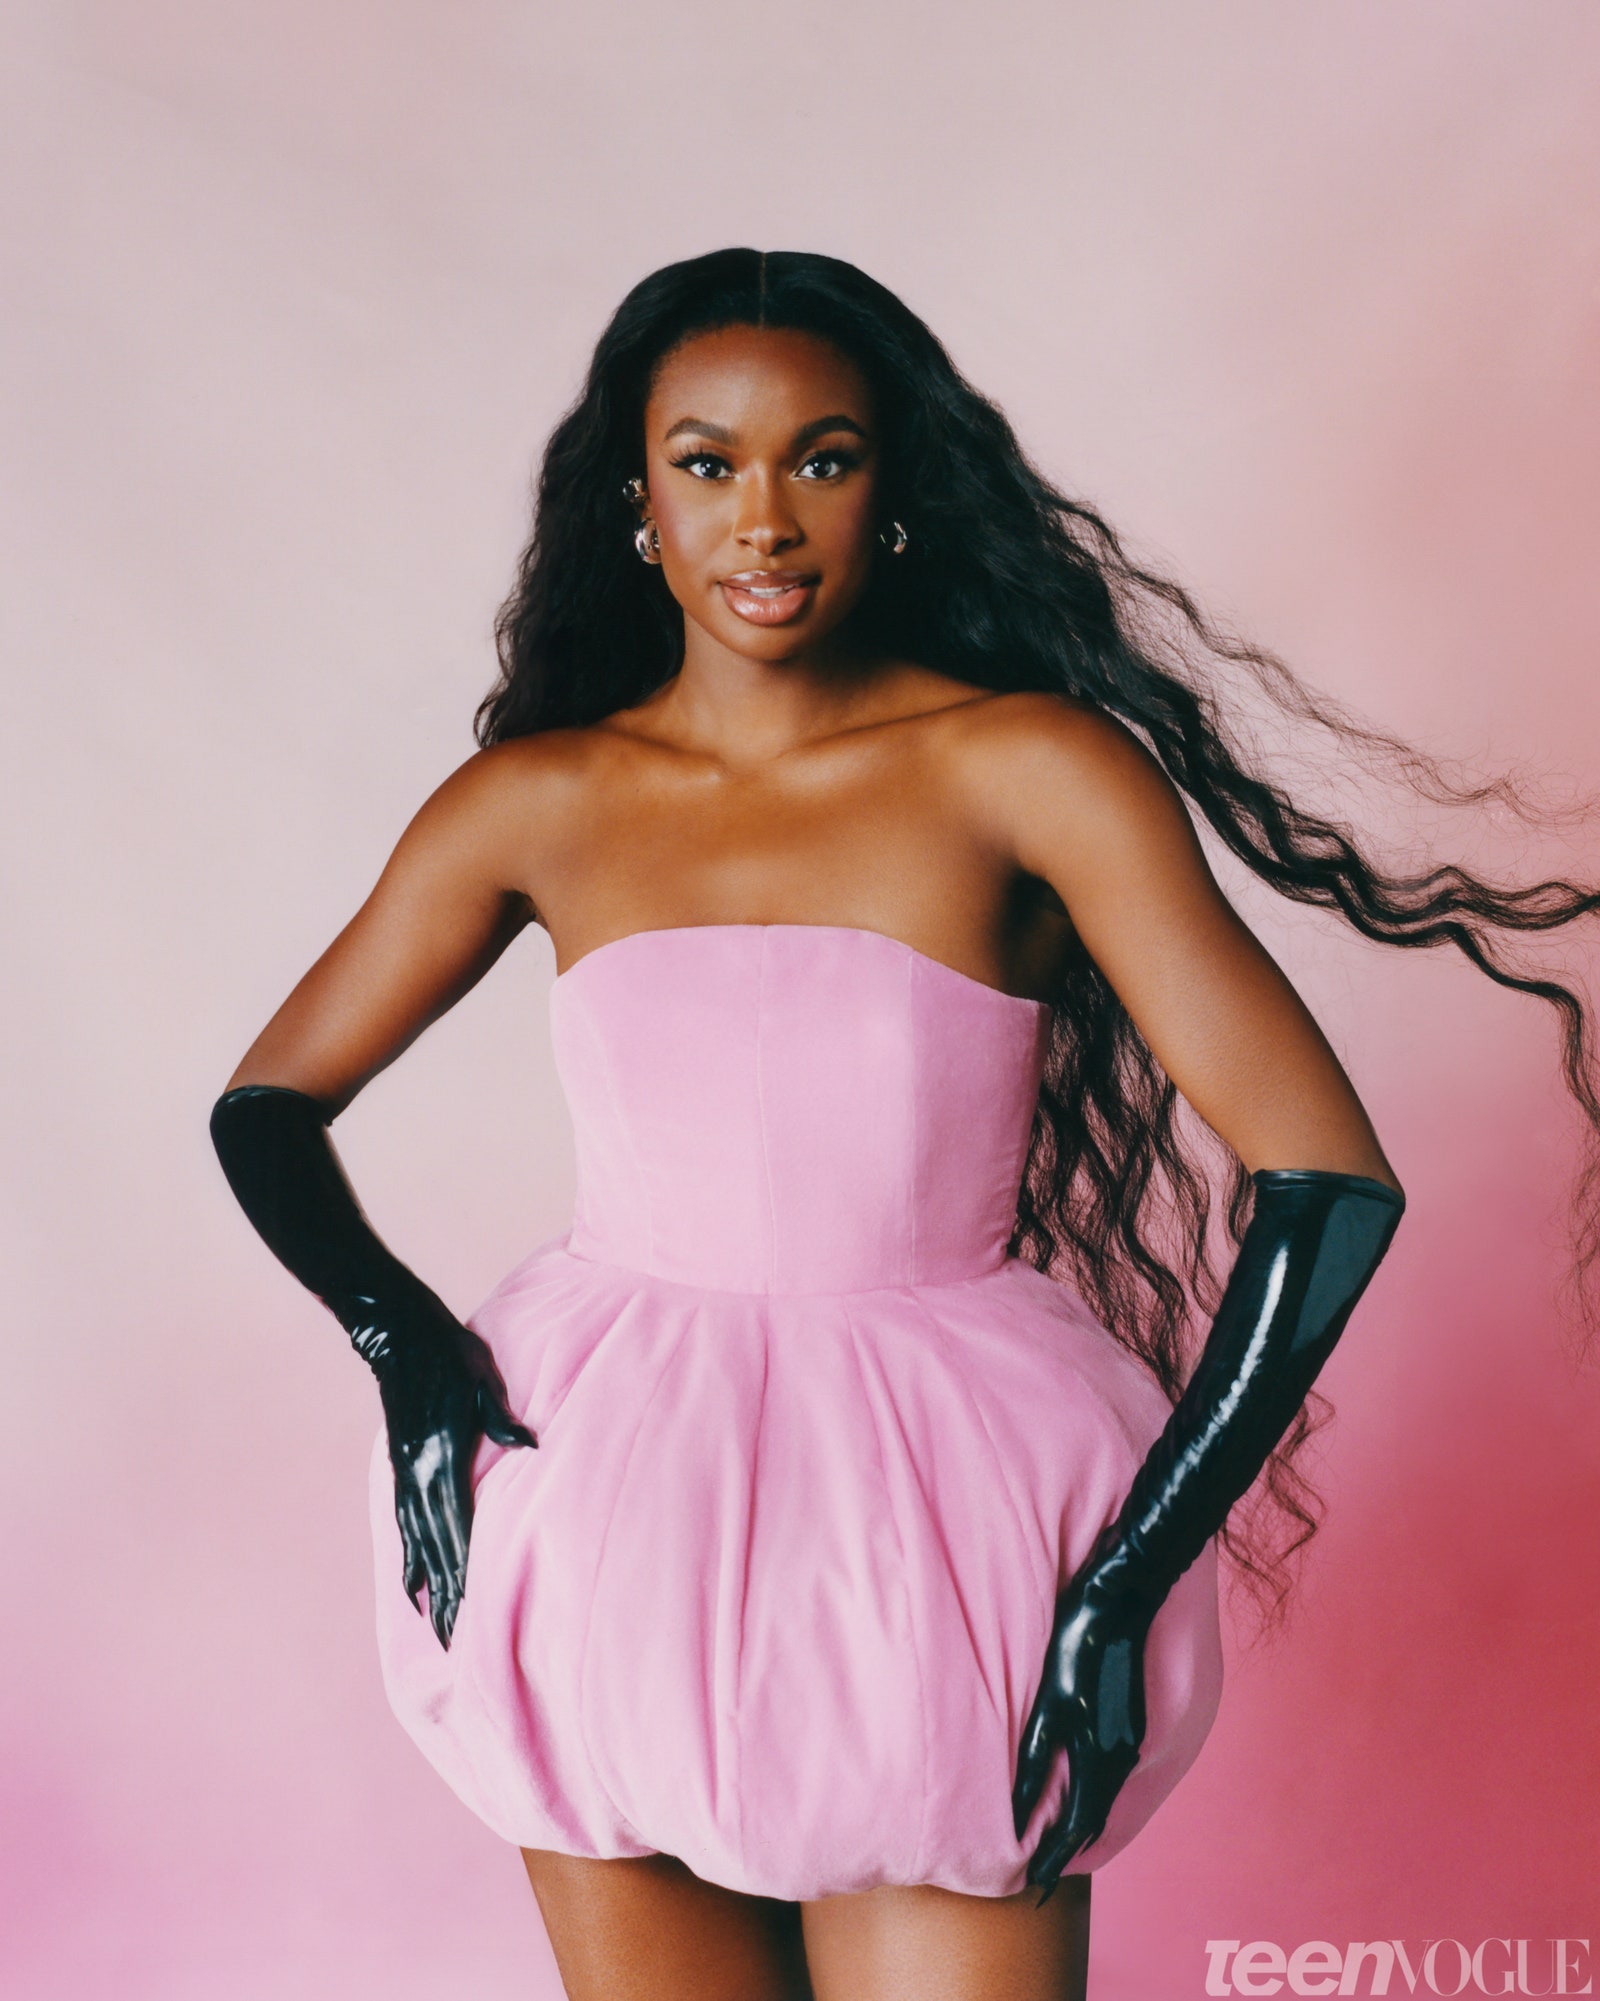 Coco Jones standing against a pink background wearing a pink dress and black latex gloves